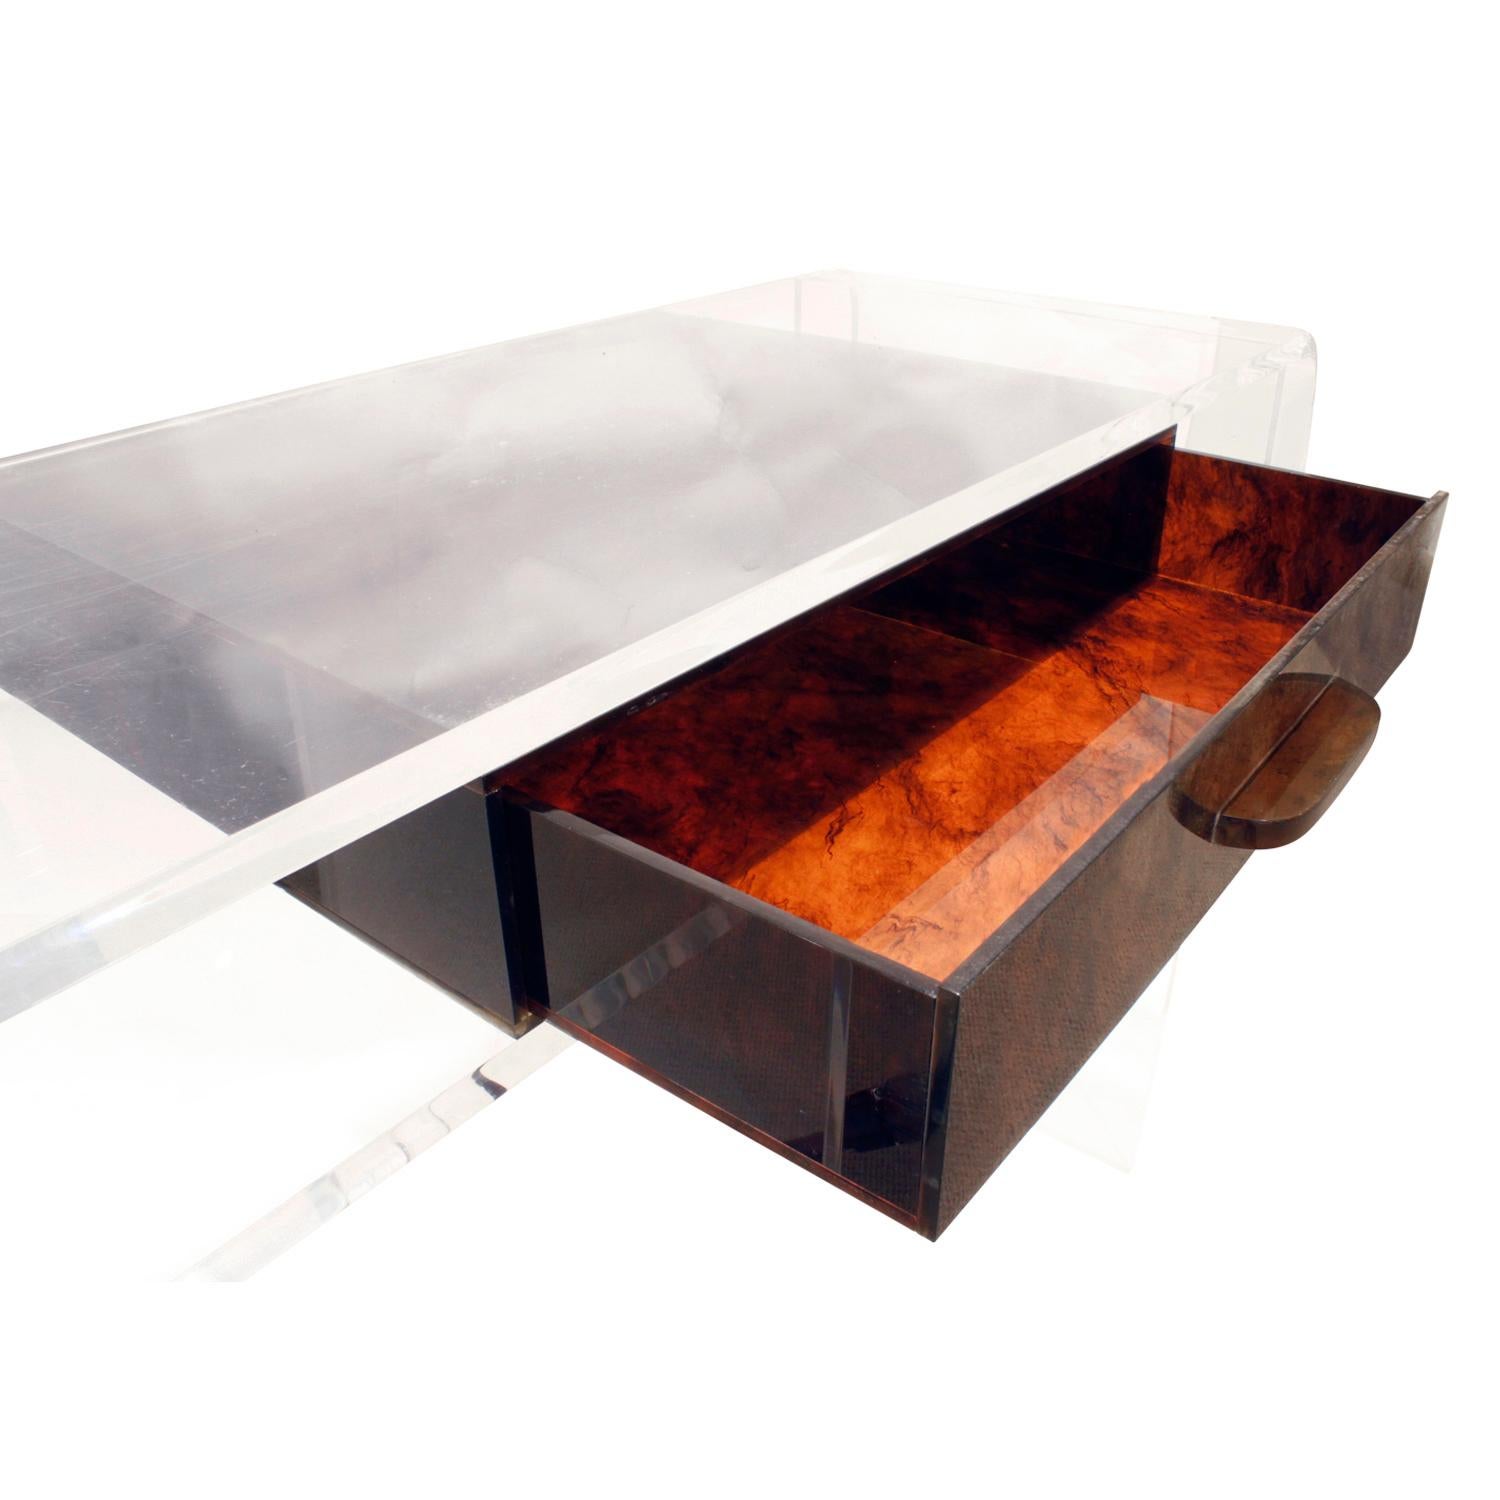 Hand-Crafted Custom Lucite Desk or Vanity with Tortishell Lucite Drawer and Chair, 1970s